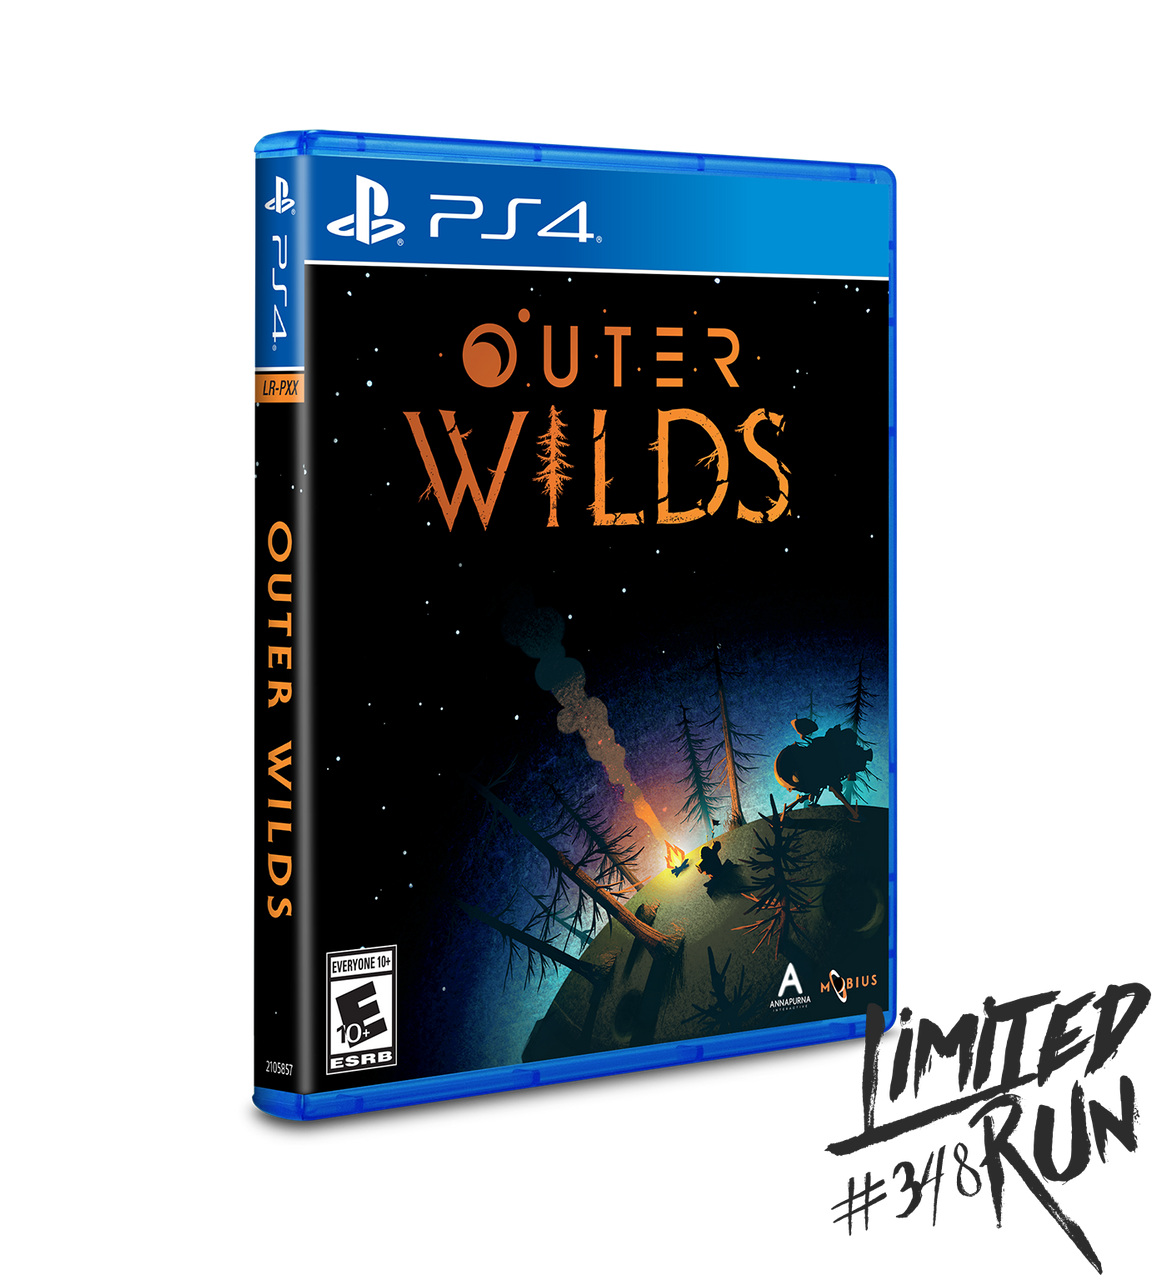 Outer Wilds ps4 диск. Outer Wilds обложка. Outer Wilds ps4 диск Обратная сторона. Outer Wilds отзывы.